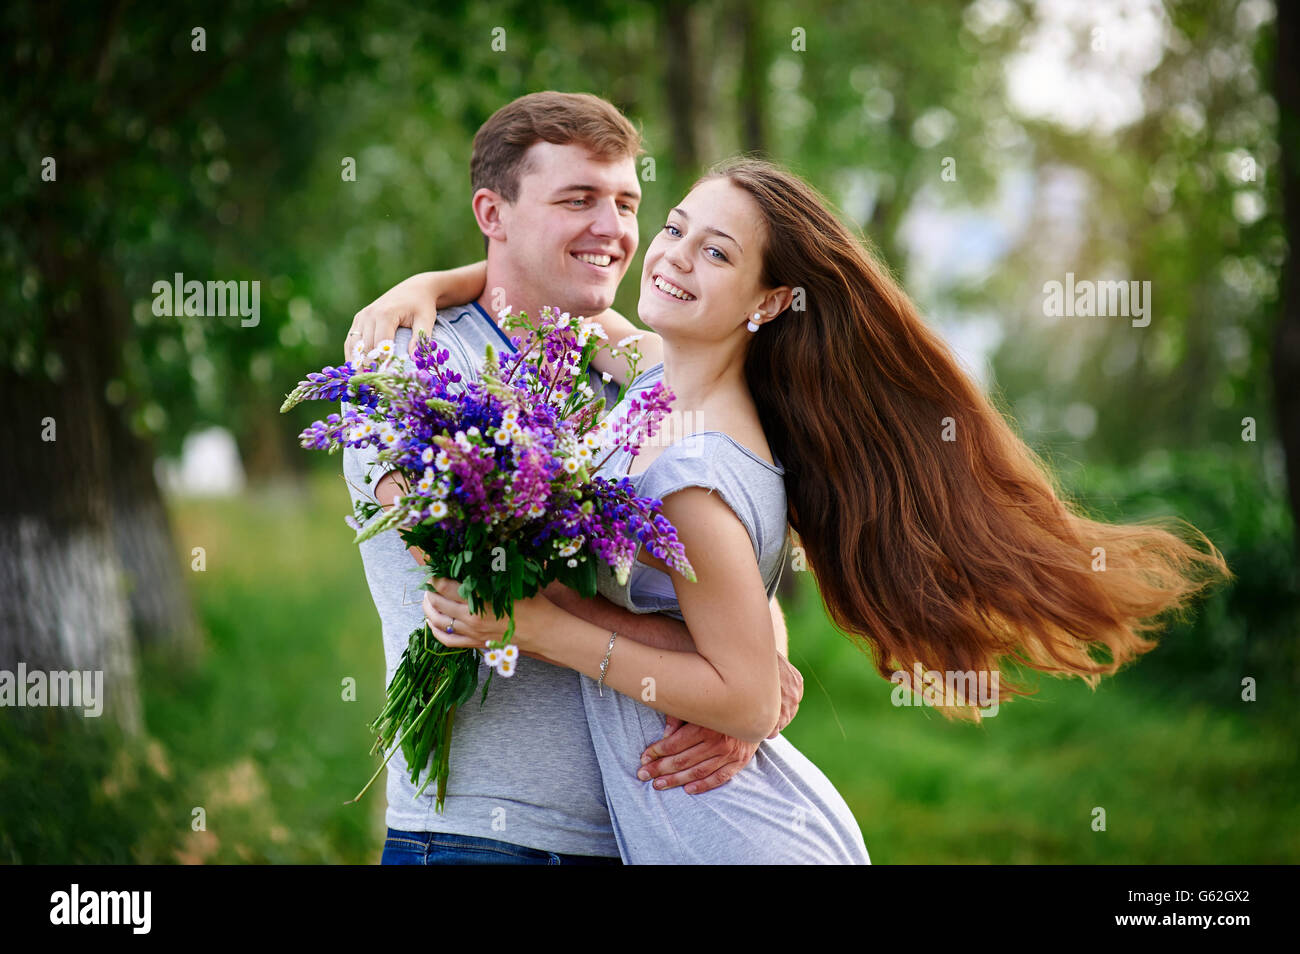 beautiful woman with long hair and a happy man hugging in field Stock Photo